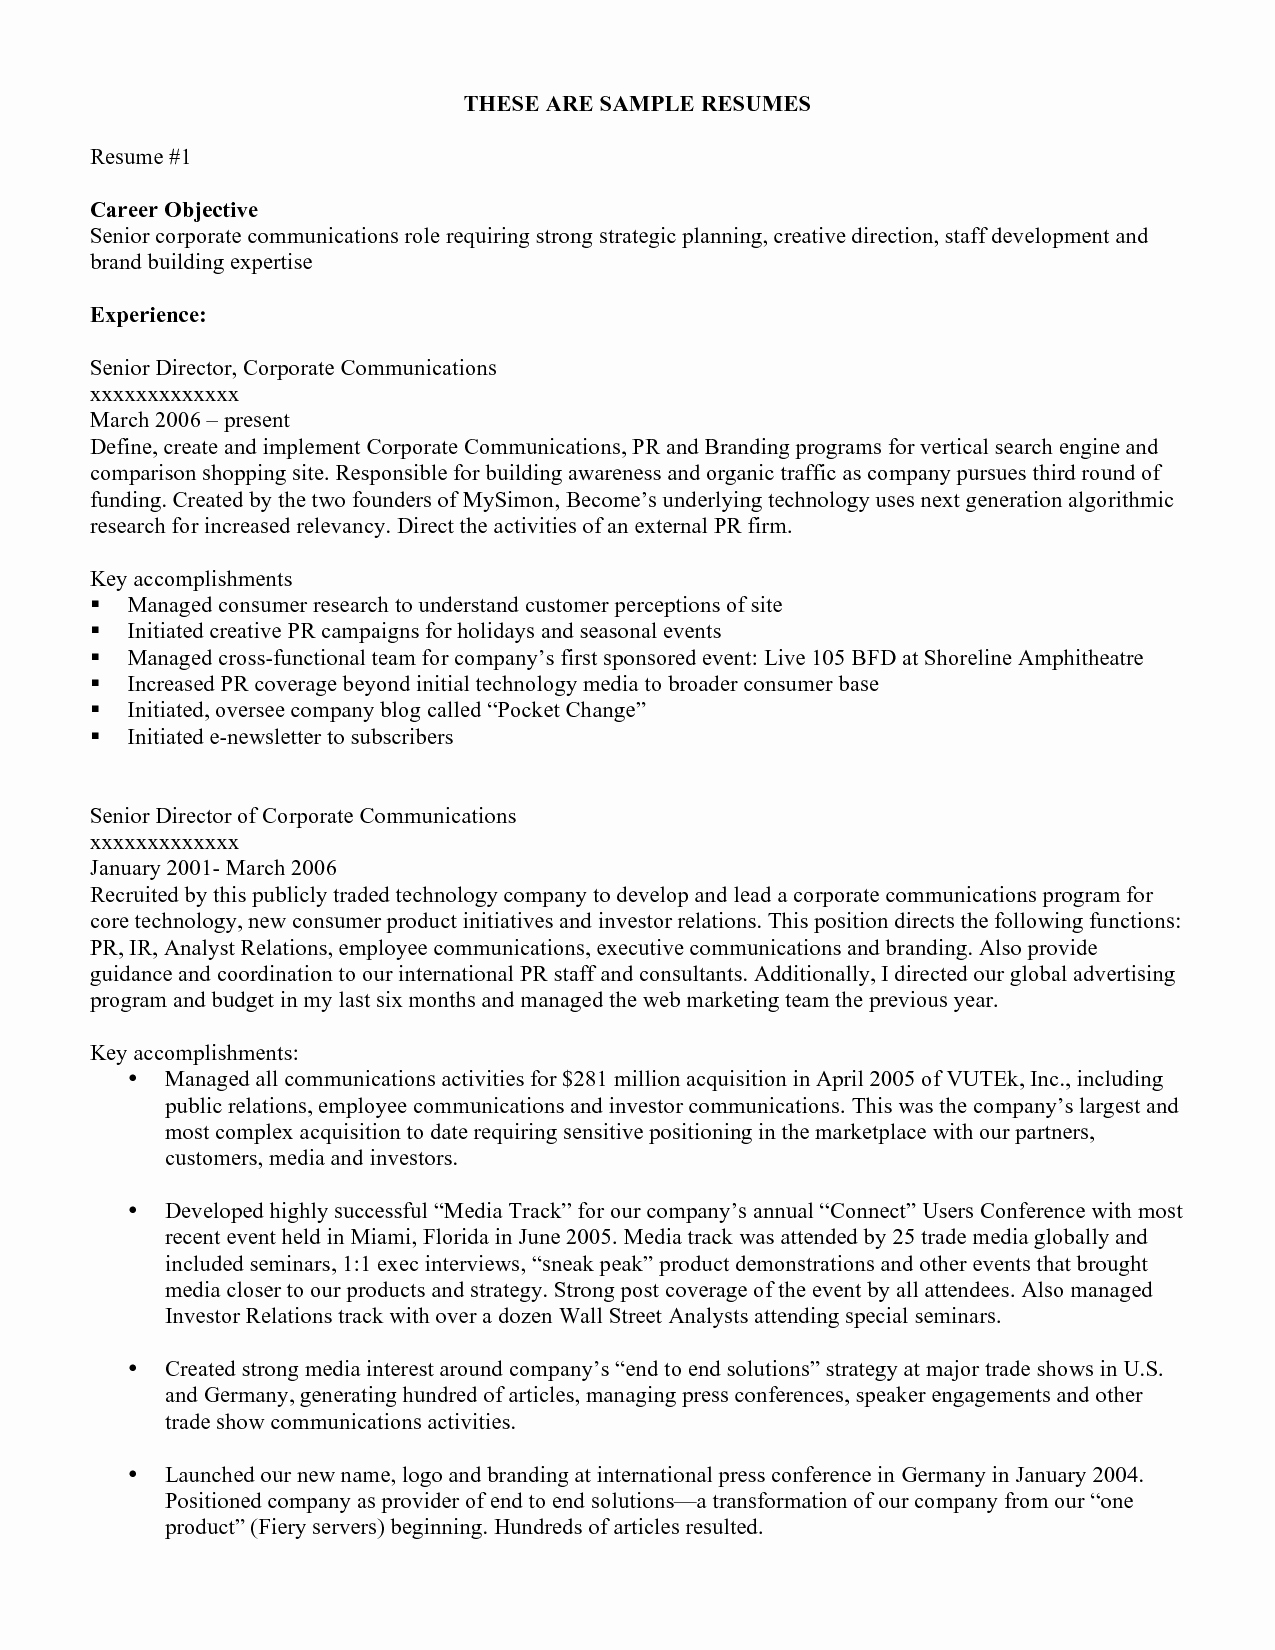 Resume Objective Examples Resume Cv